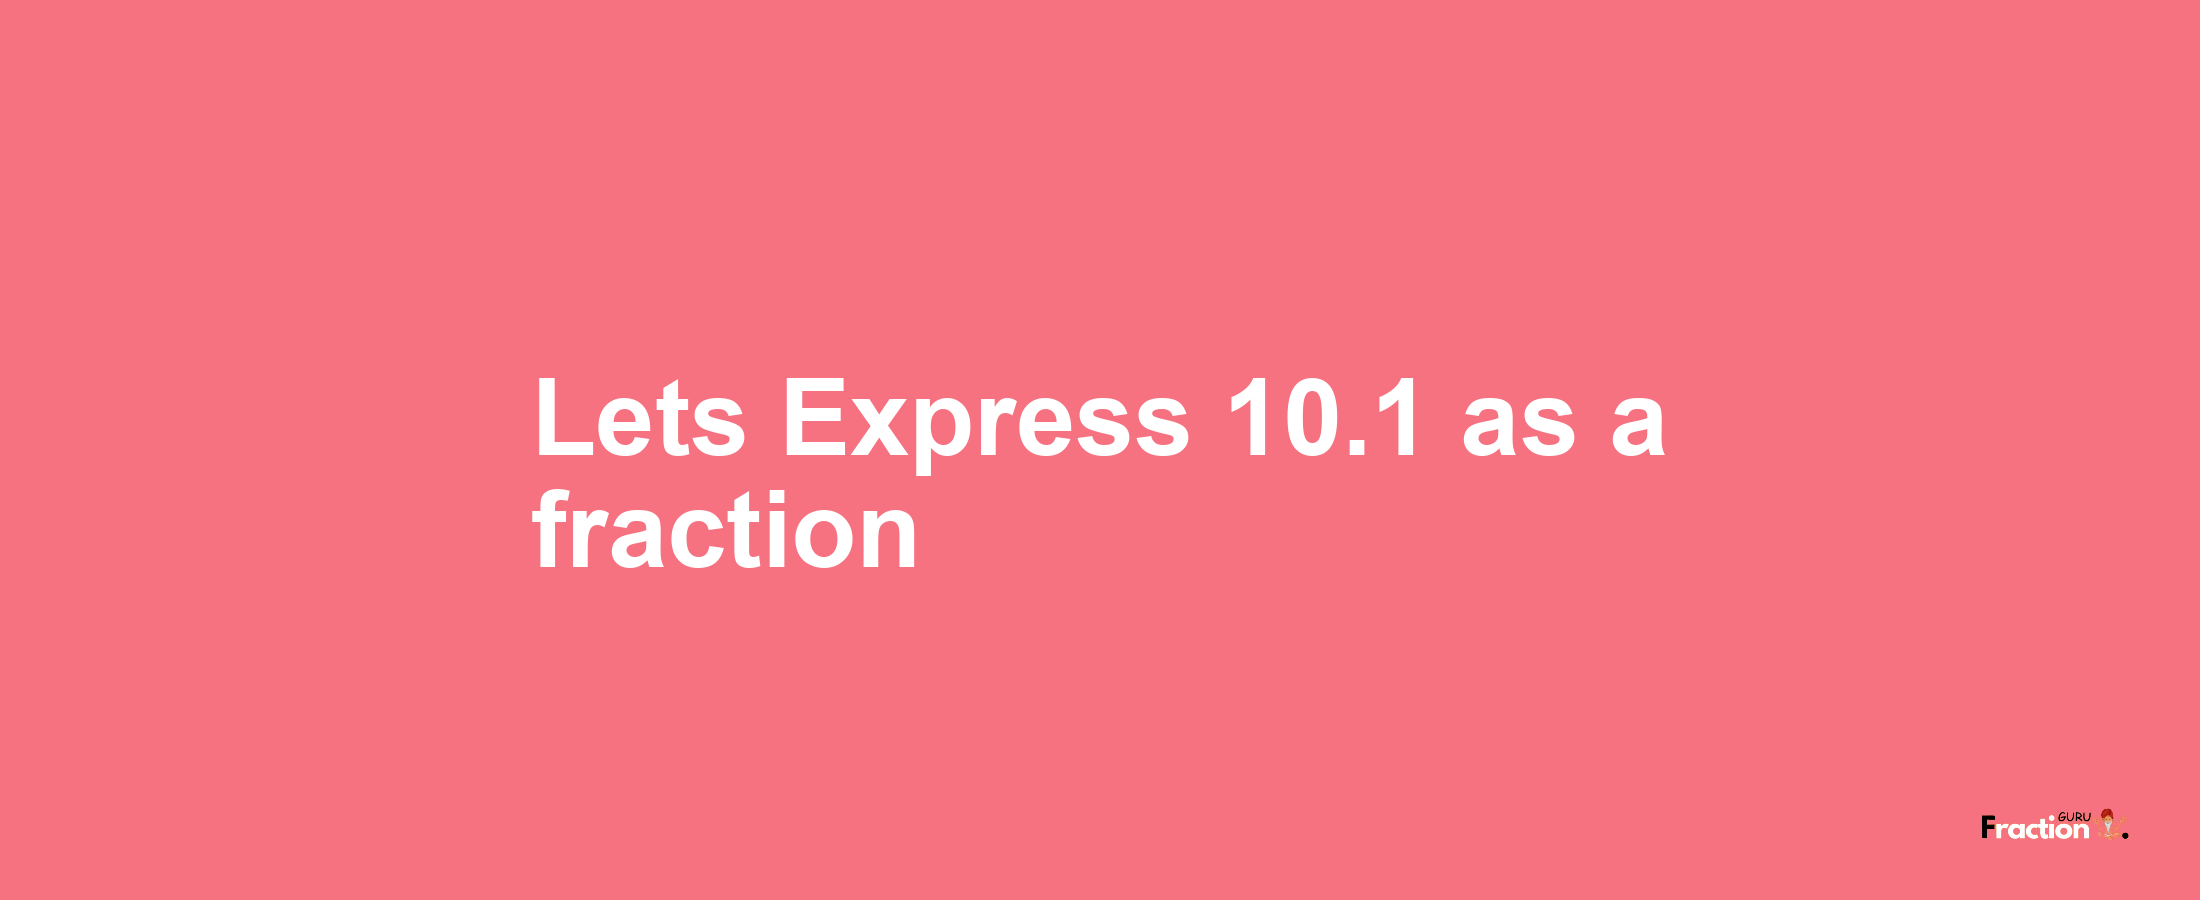 Lets Express 10.1 as afraction